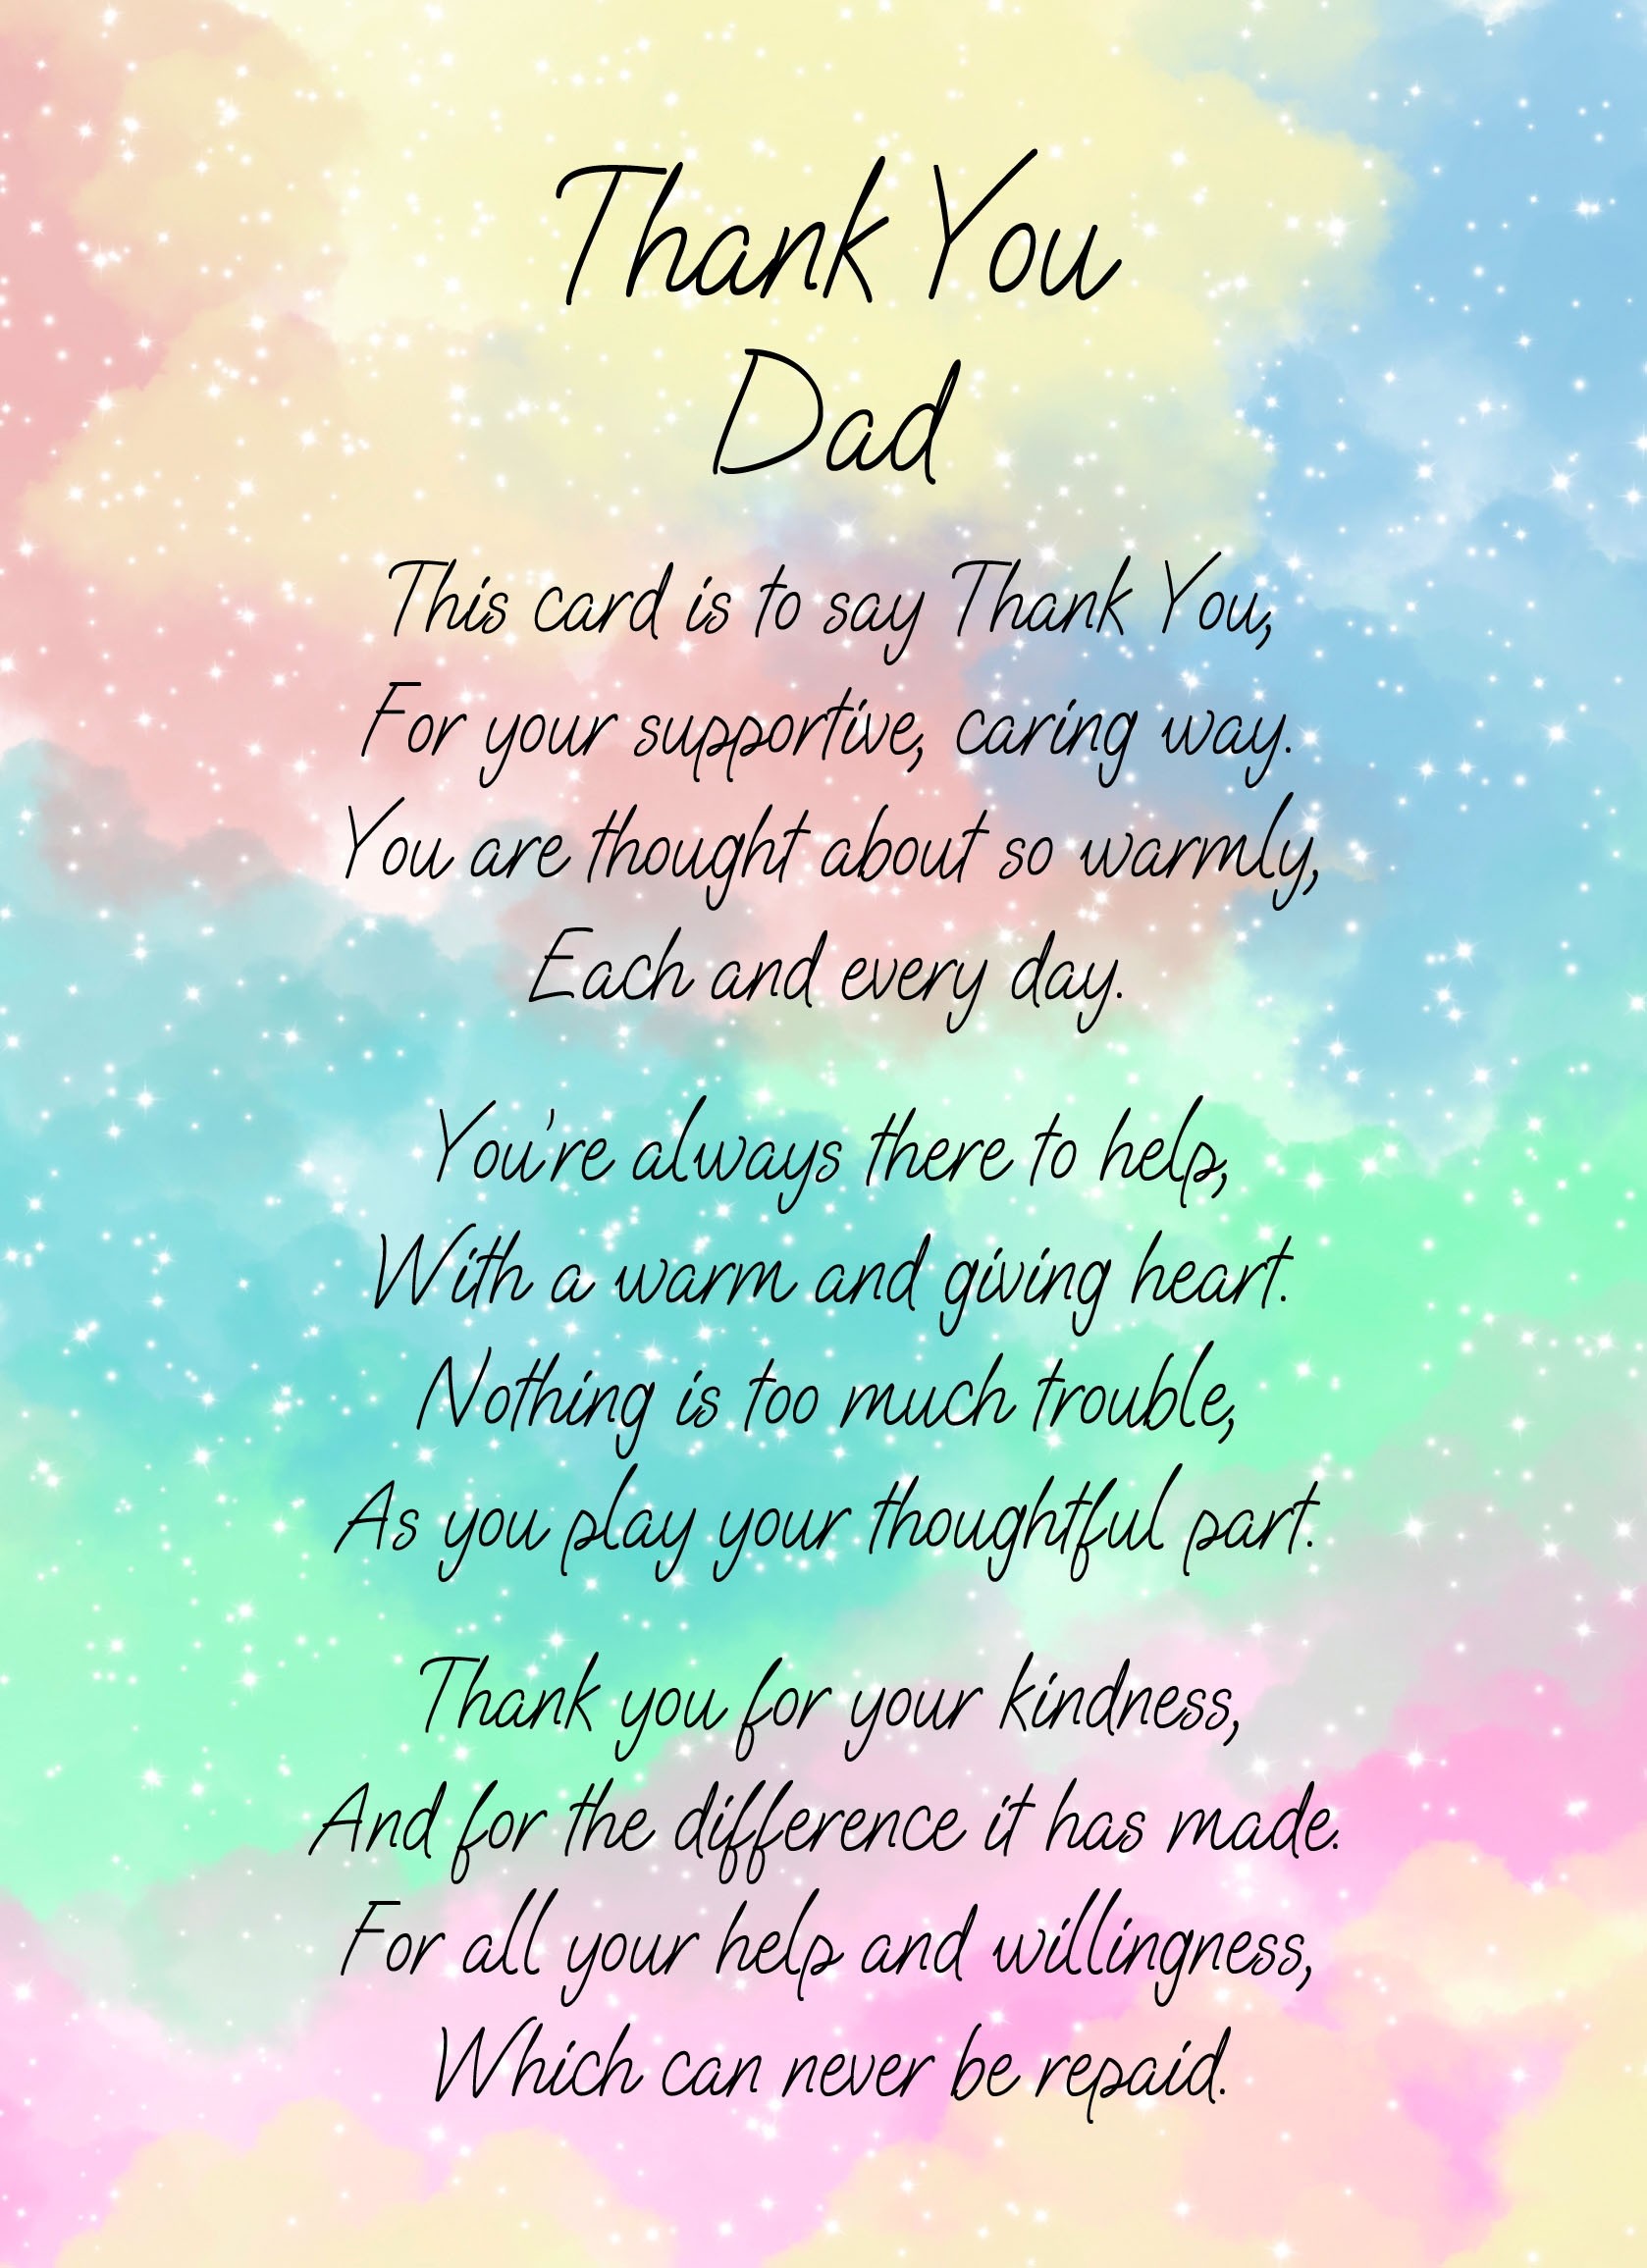 Thank You Poem Verse Card For Dad